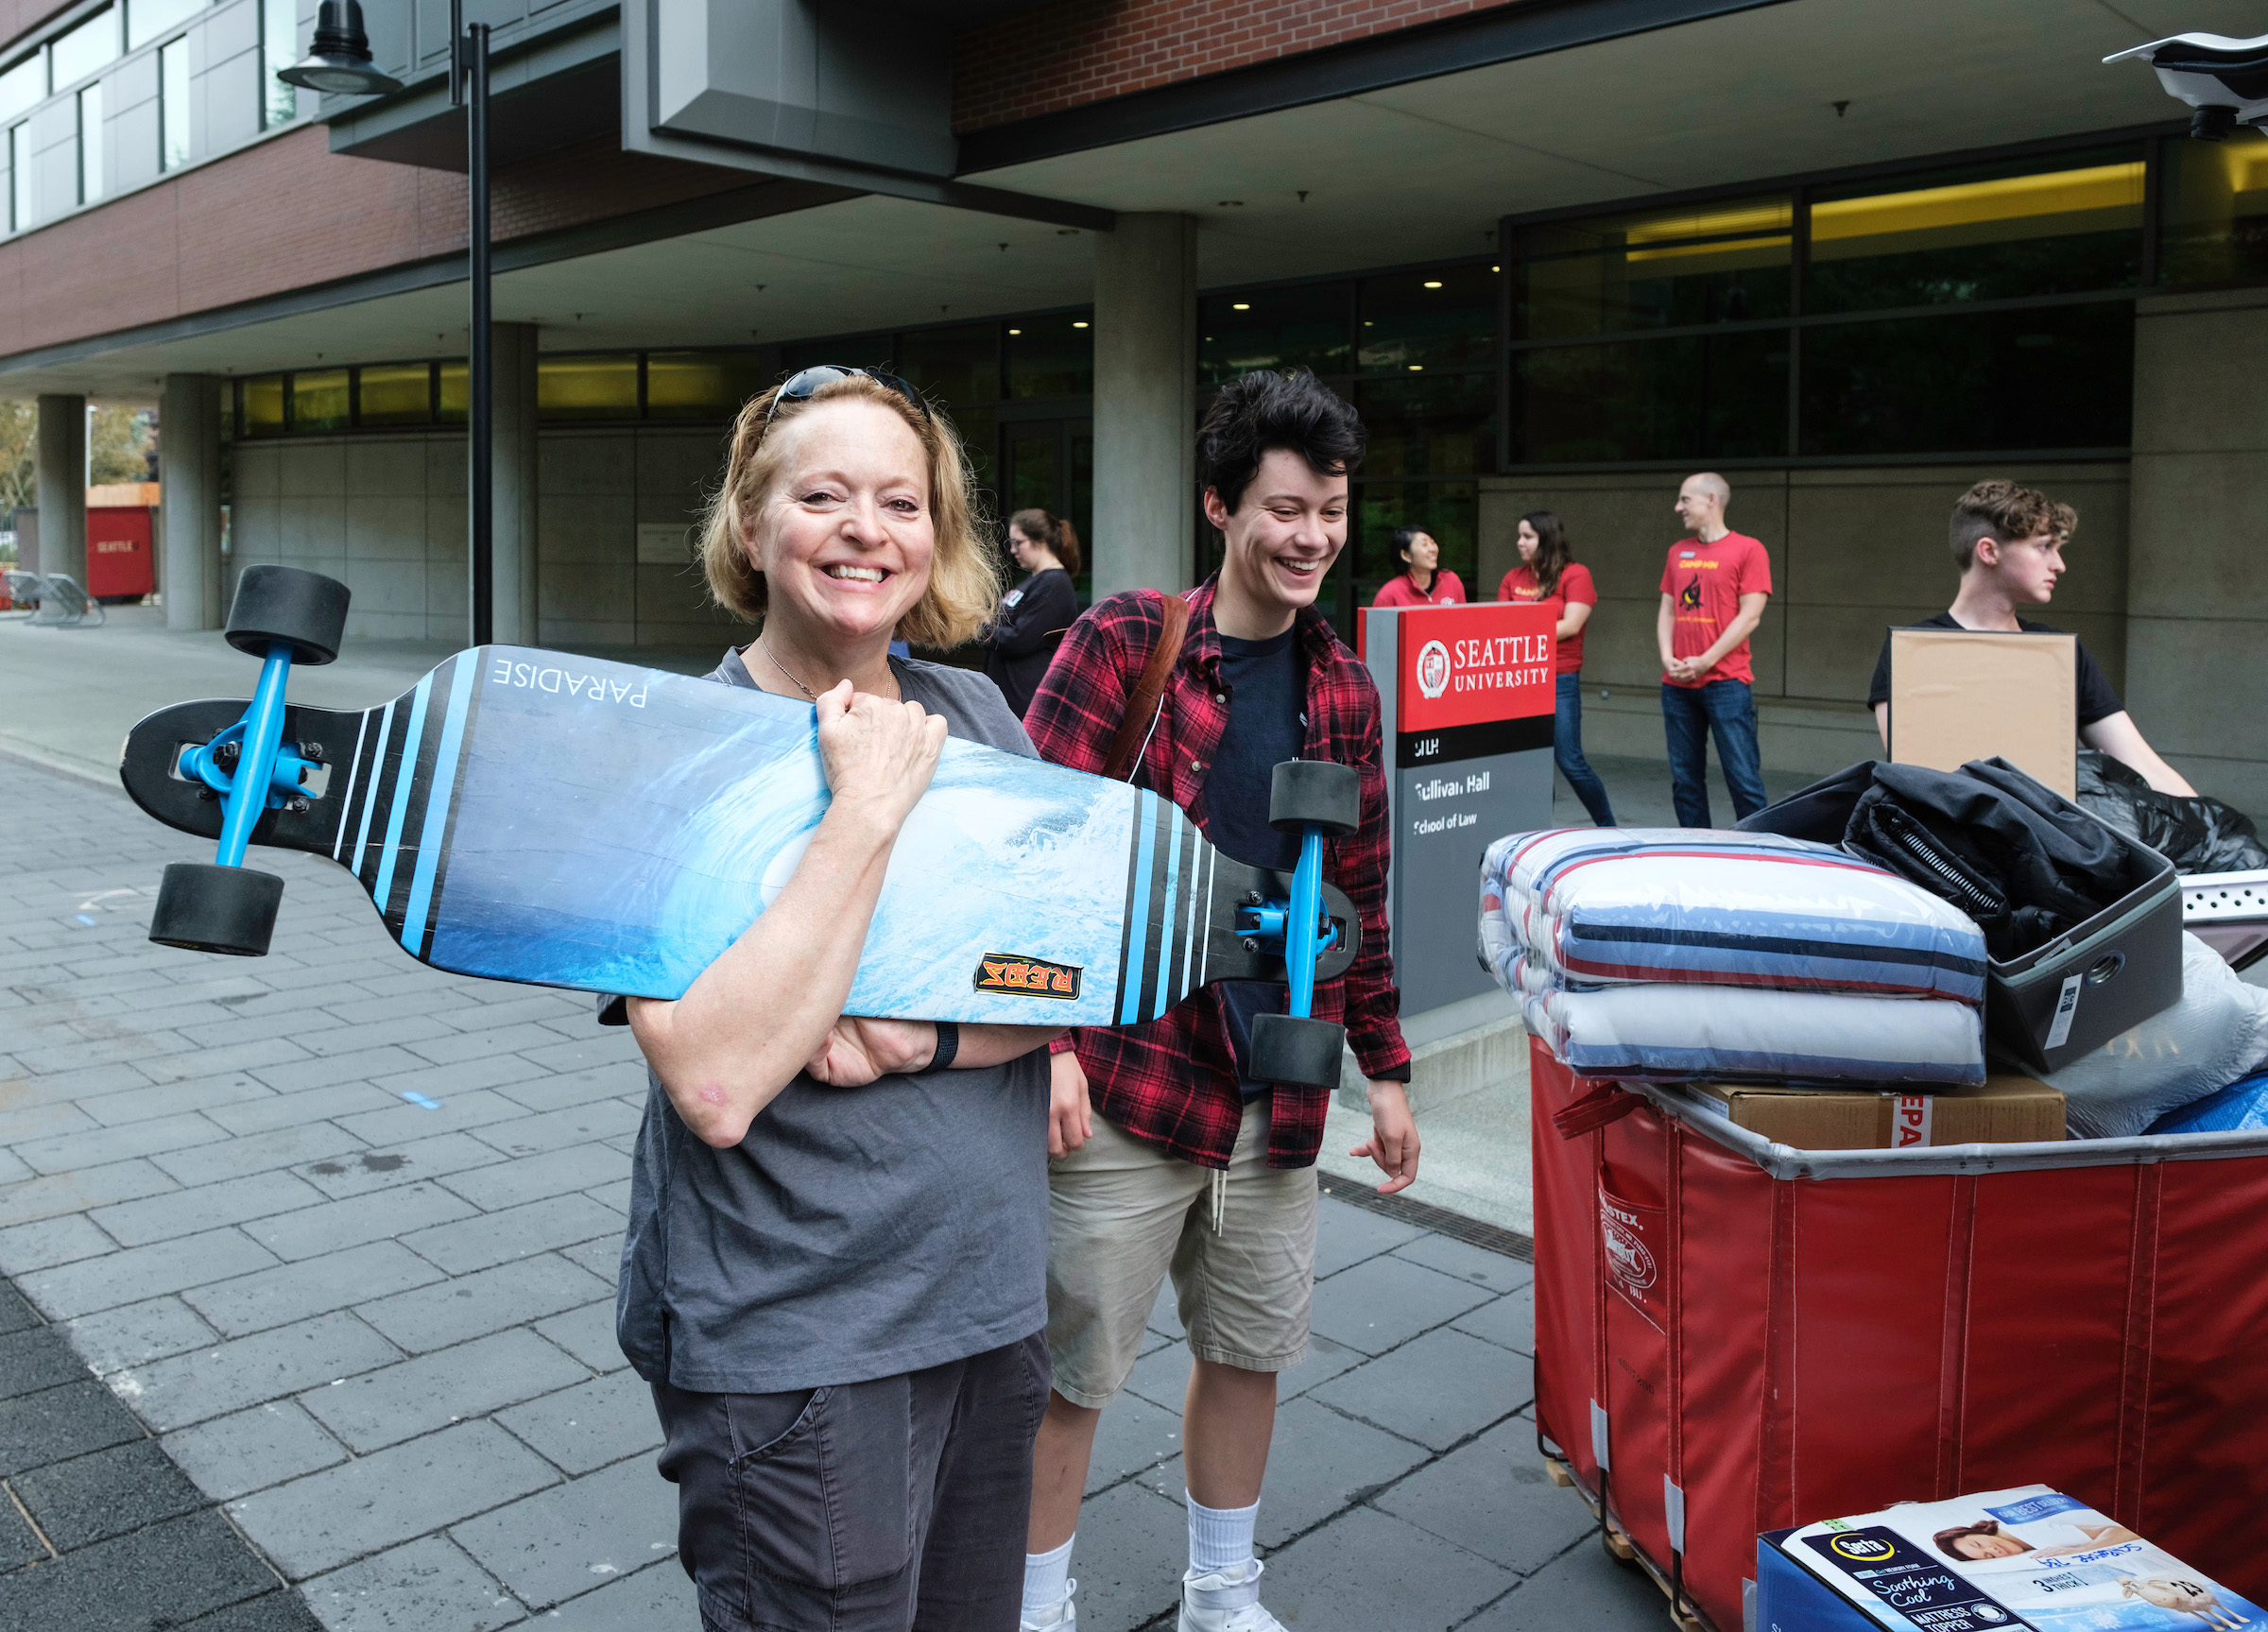 Parent and student on move-in day.